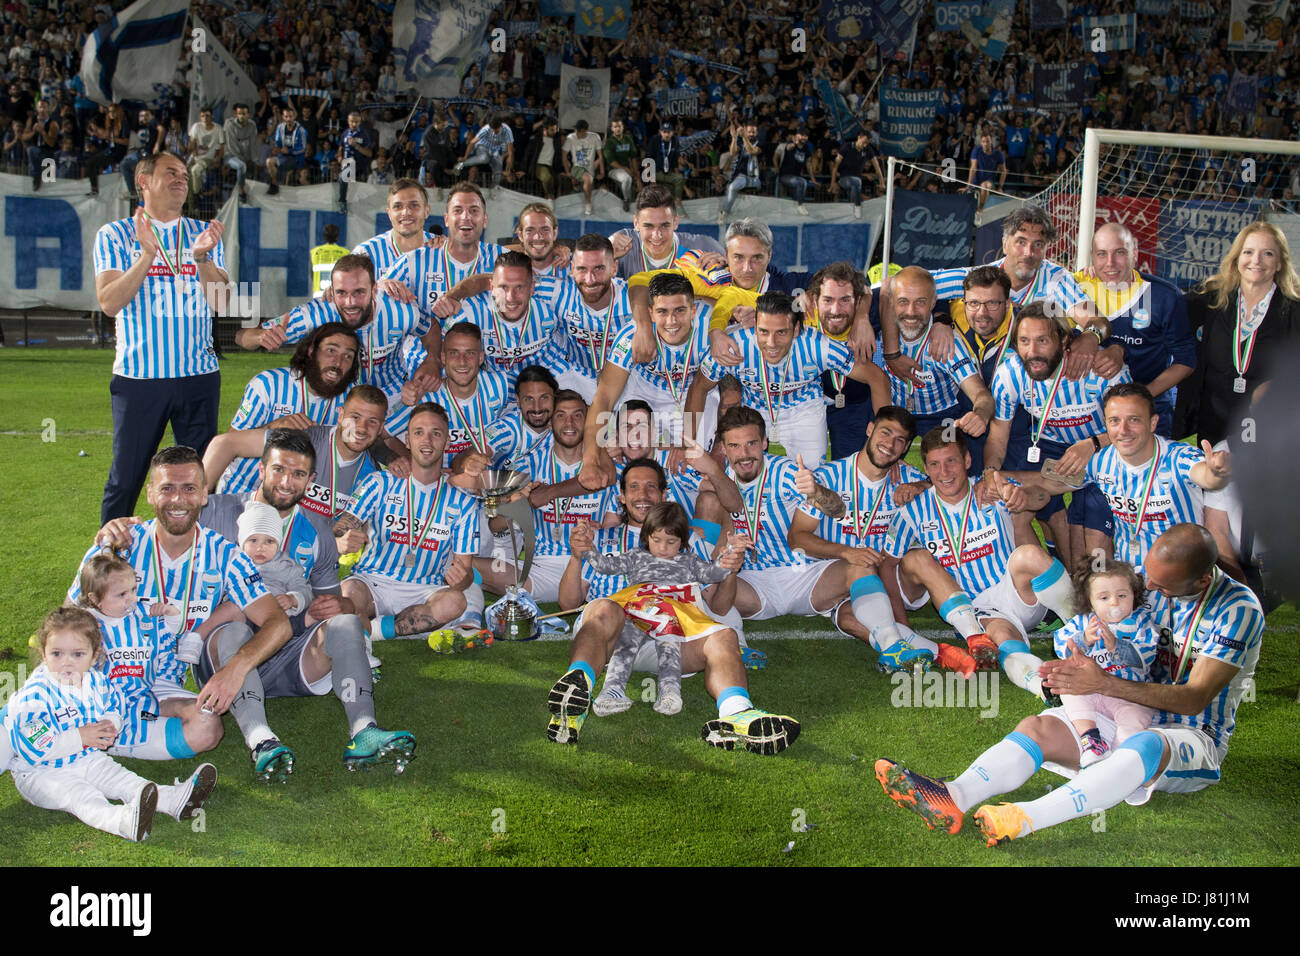 Ferrara, Italy. 18th May, 2017. Nicolas Giani (SPAL) Football/Soccer :  Nicolas Giani of SPAL celebrates their league title with the trophy after  the Italian Serie B match between SPAL 2-1 FC Bari